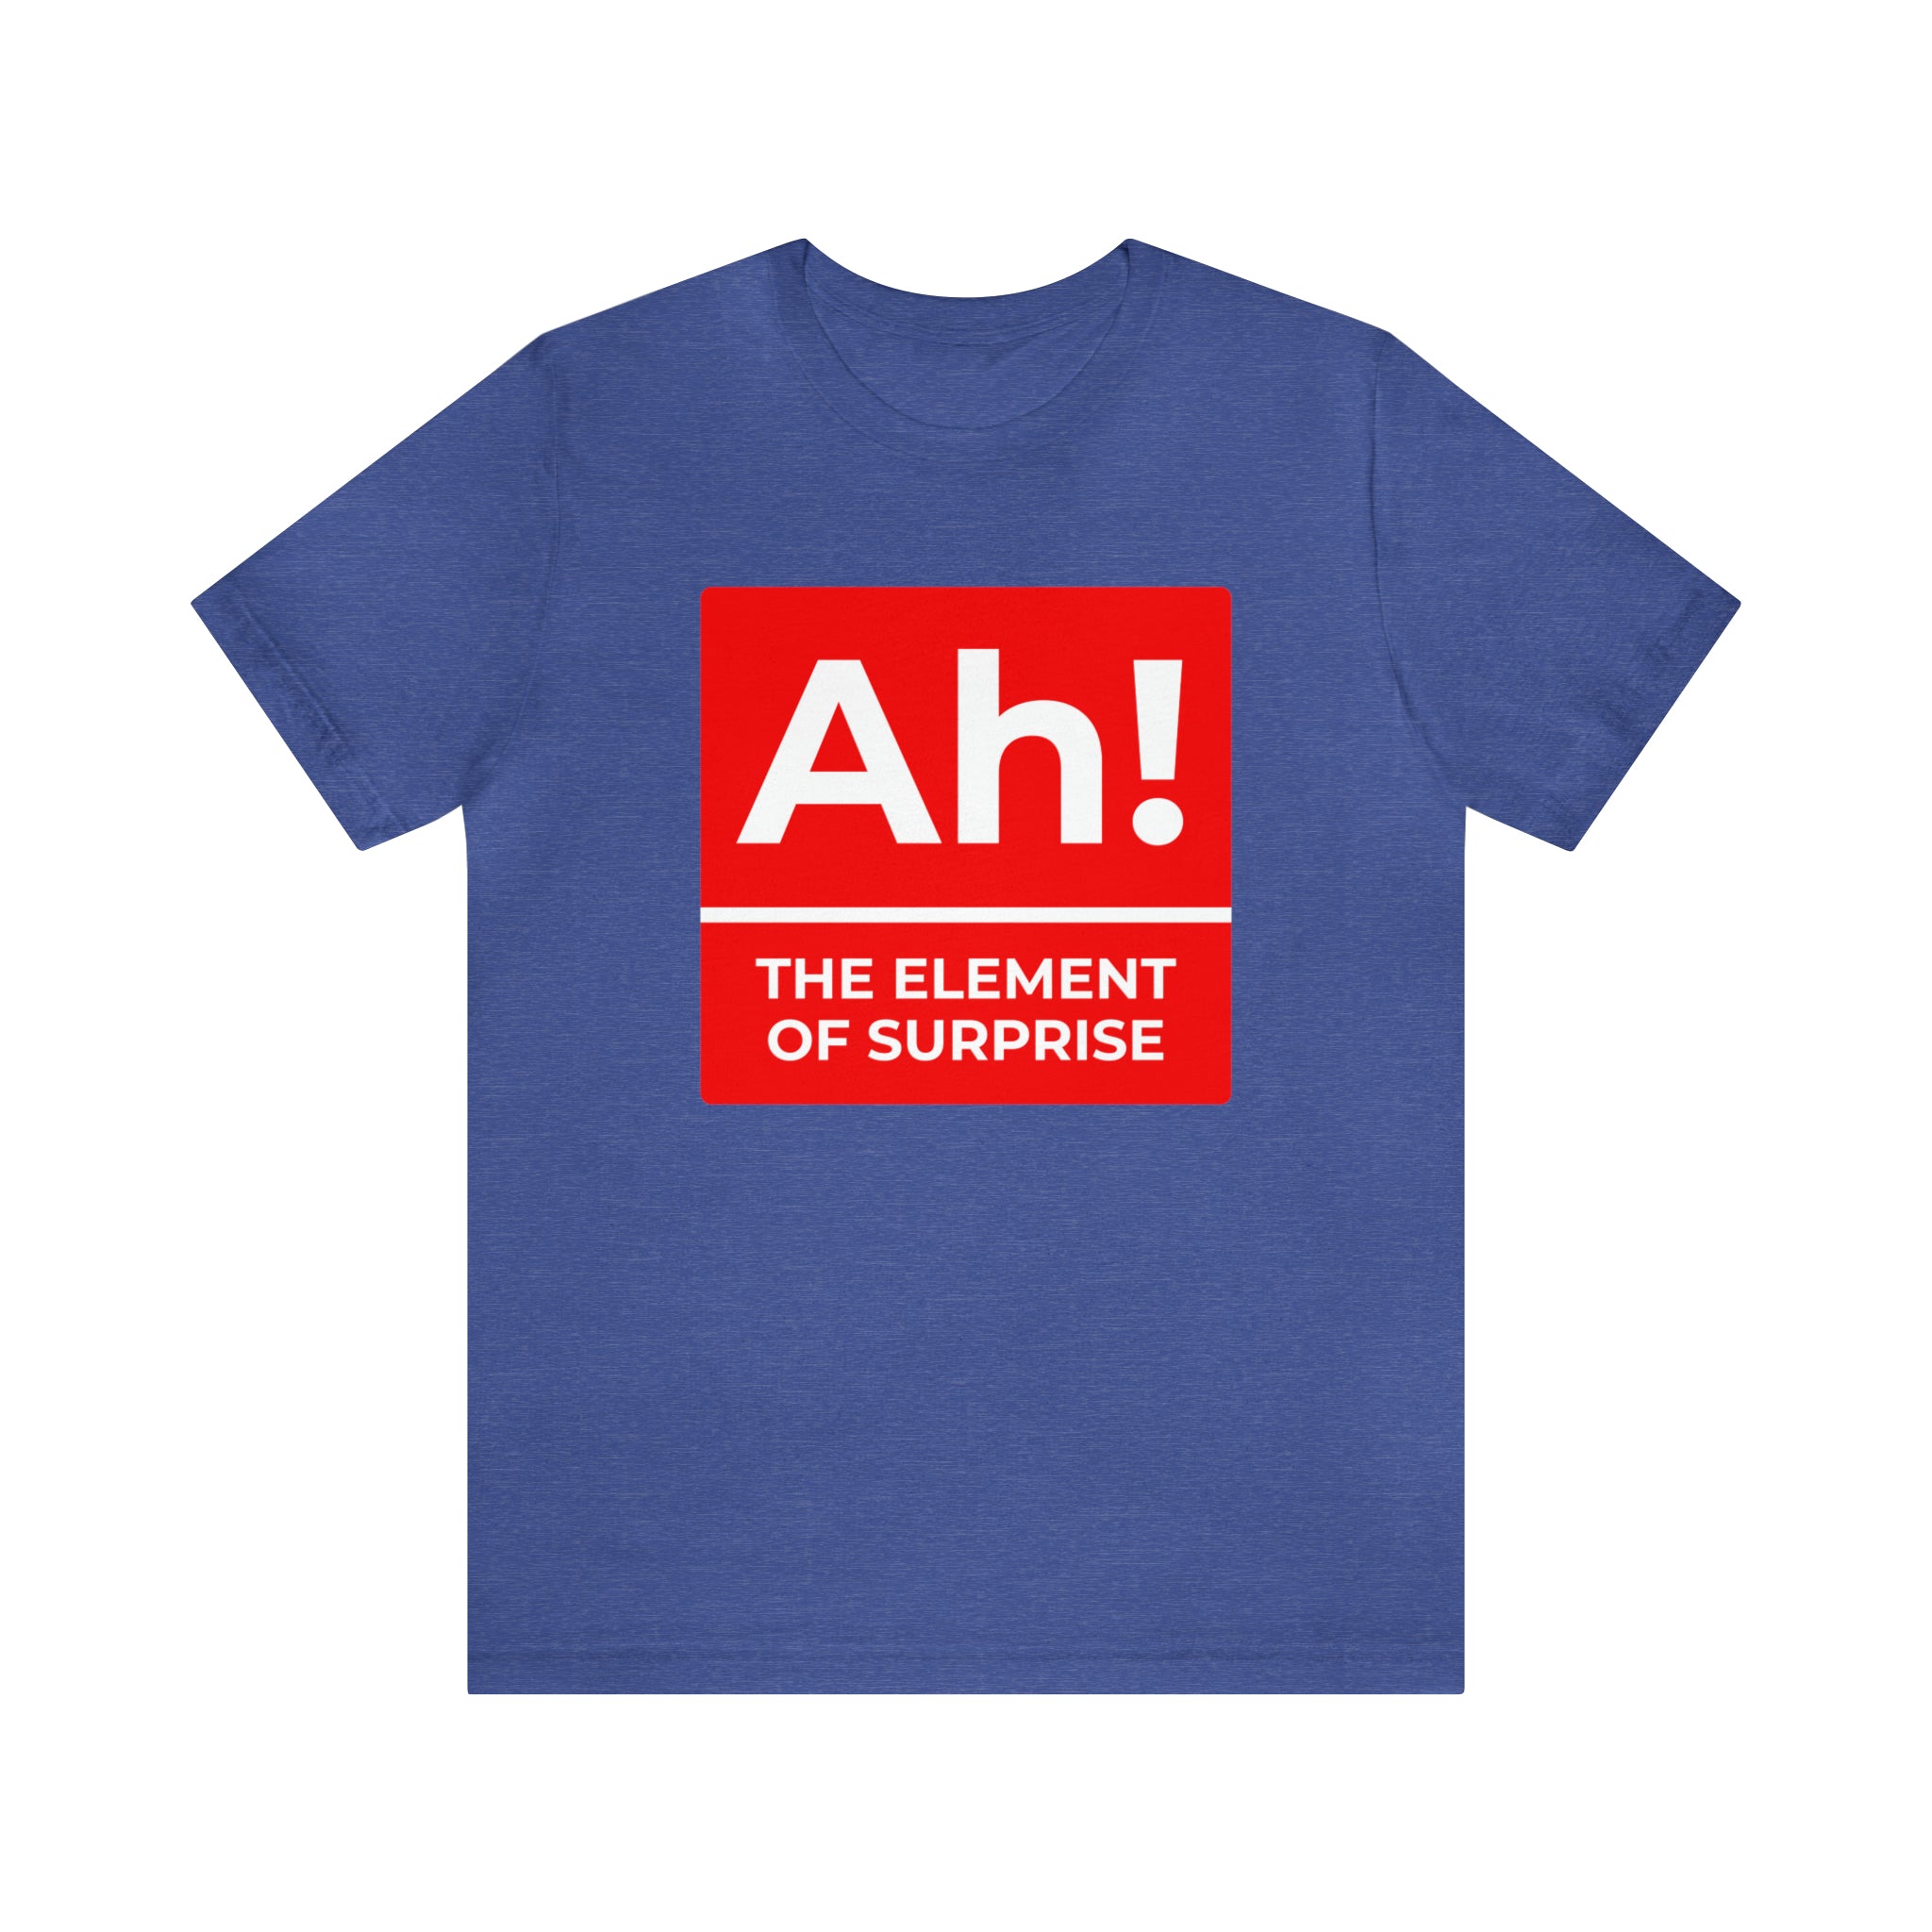 Ah! the Element of Surprise T-shirt. Designed for those who love chemistry and science.